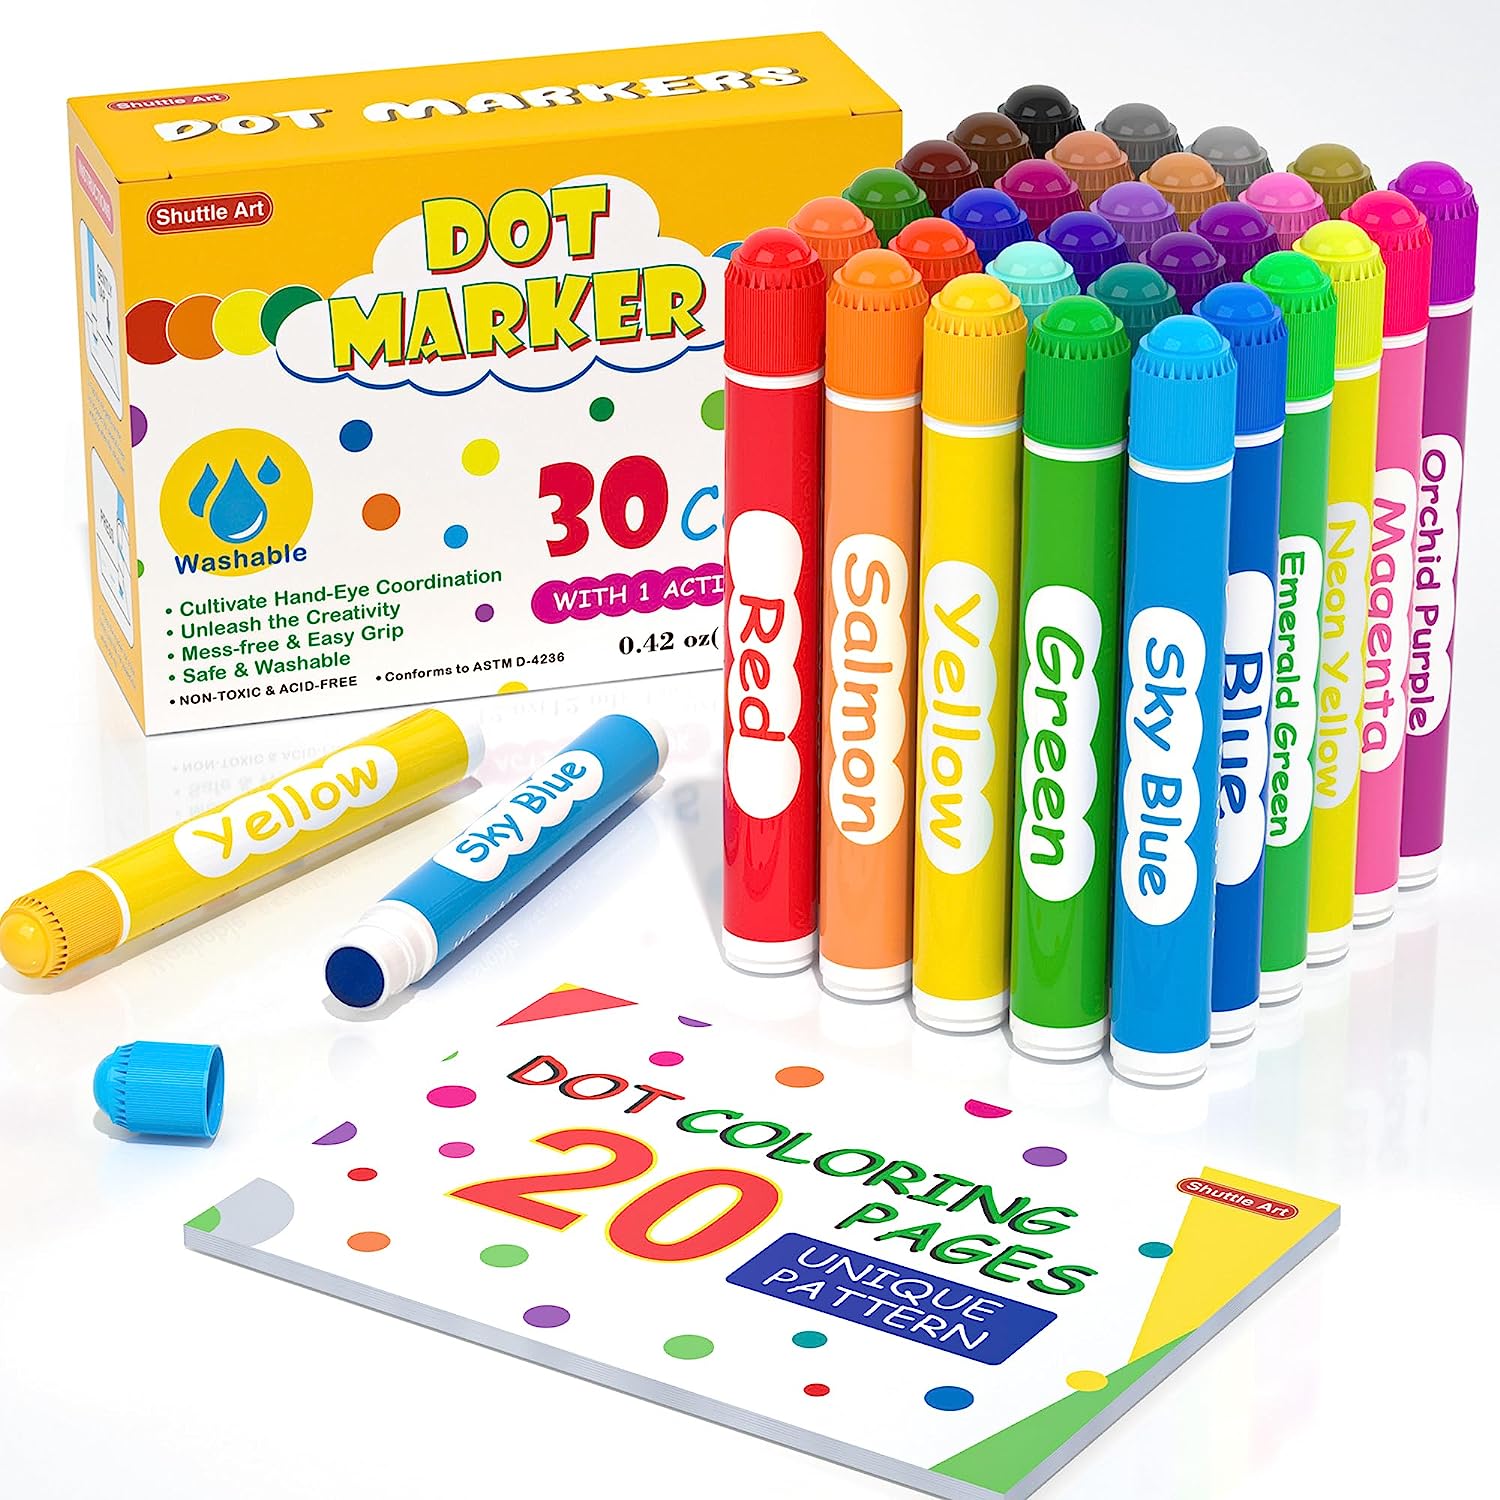 Shuttle Art Dot Markers, 30 Colors Washable for [...]